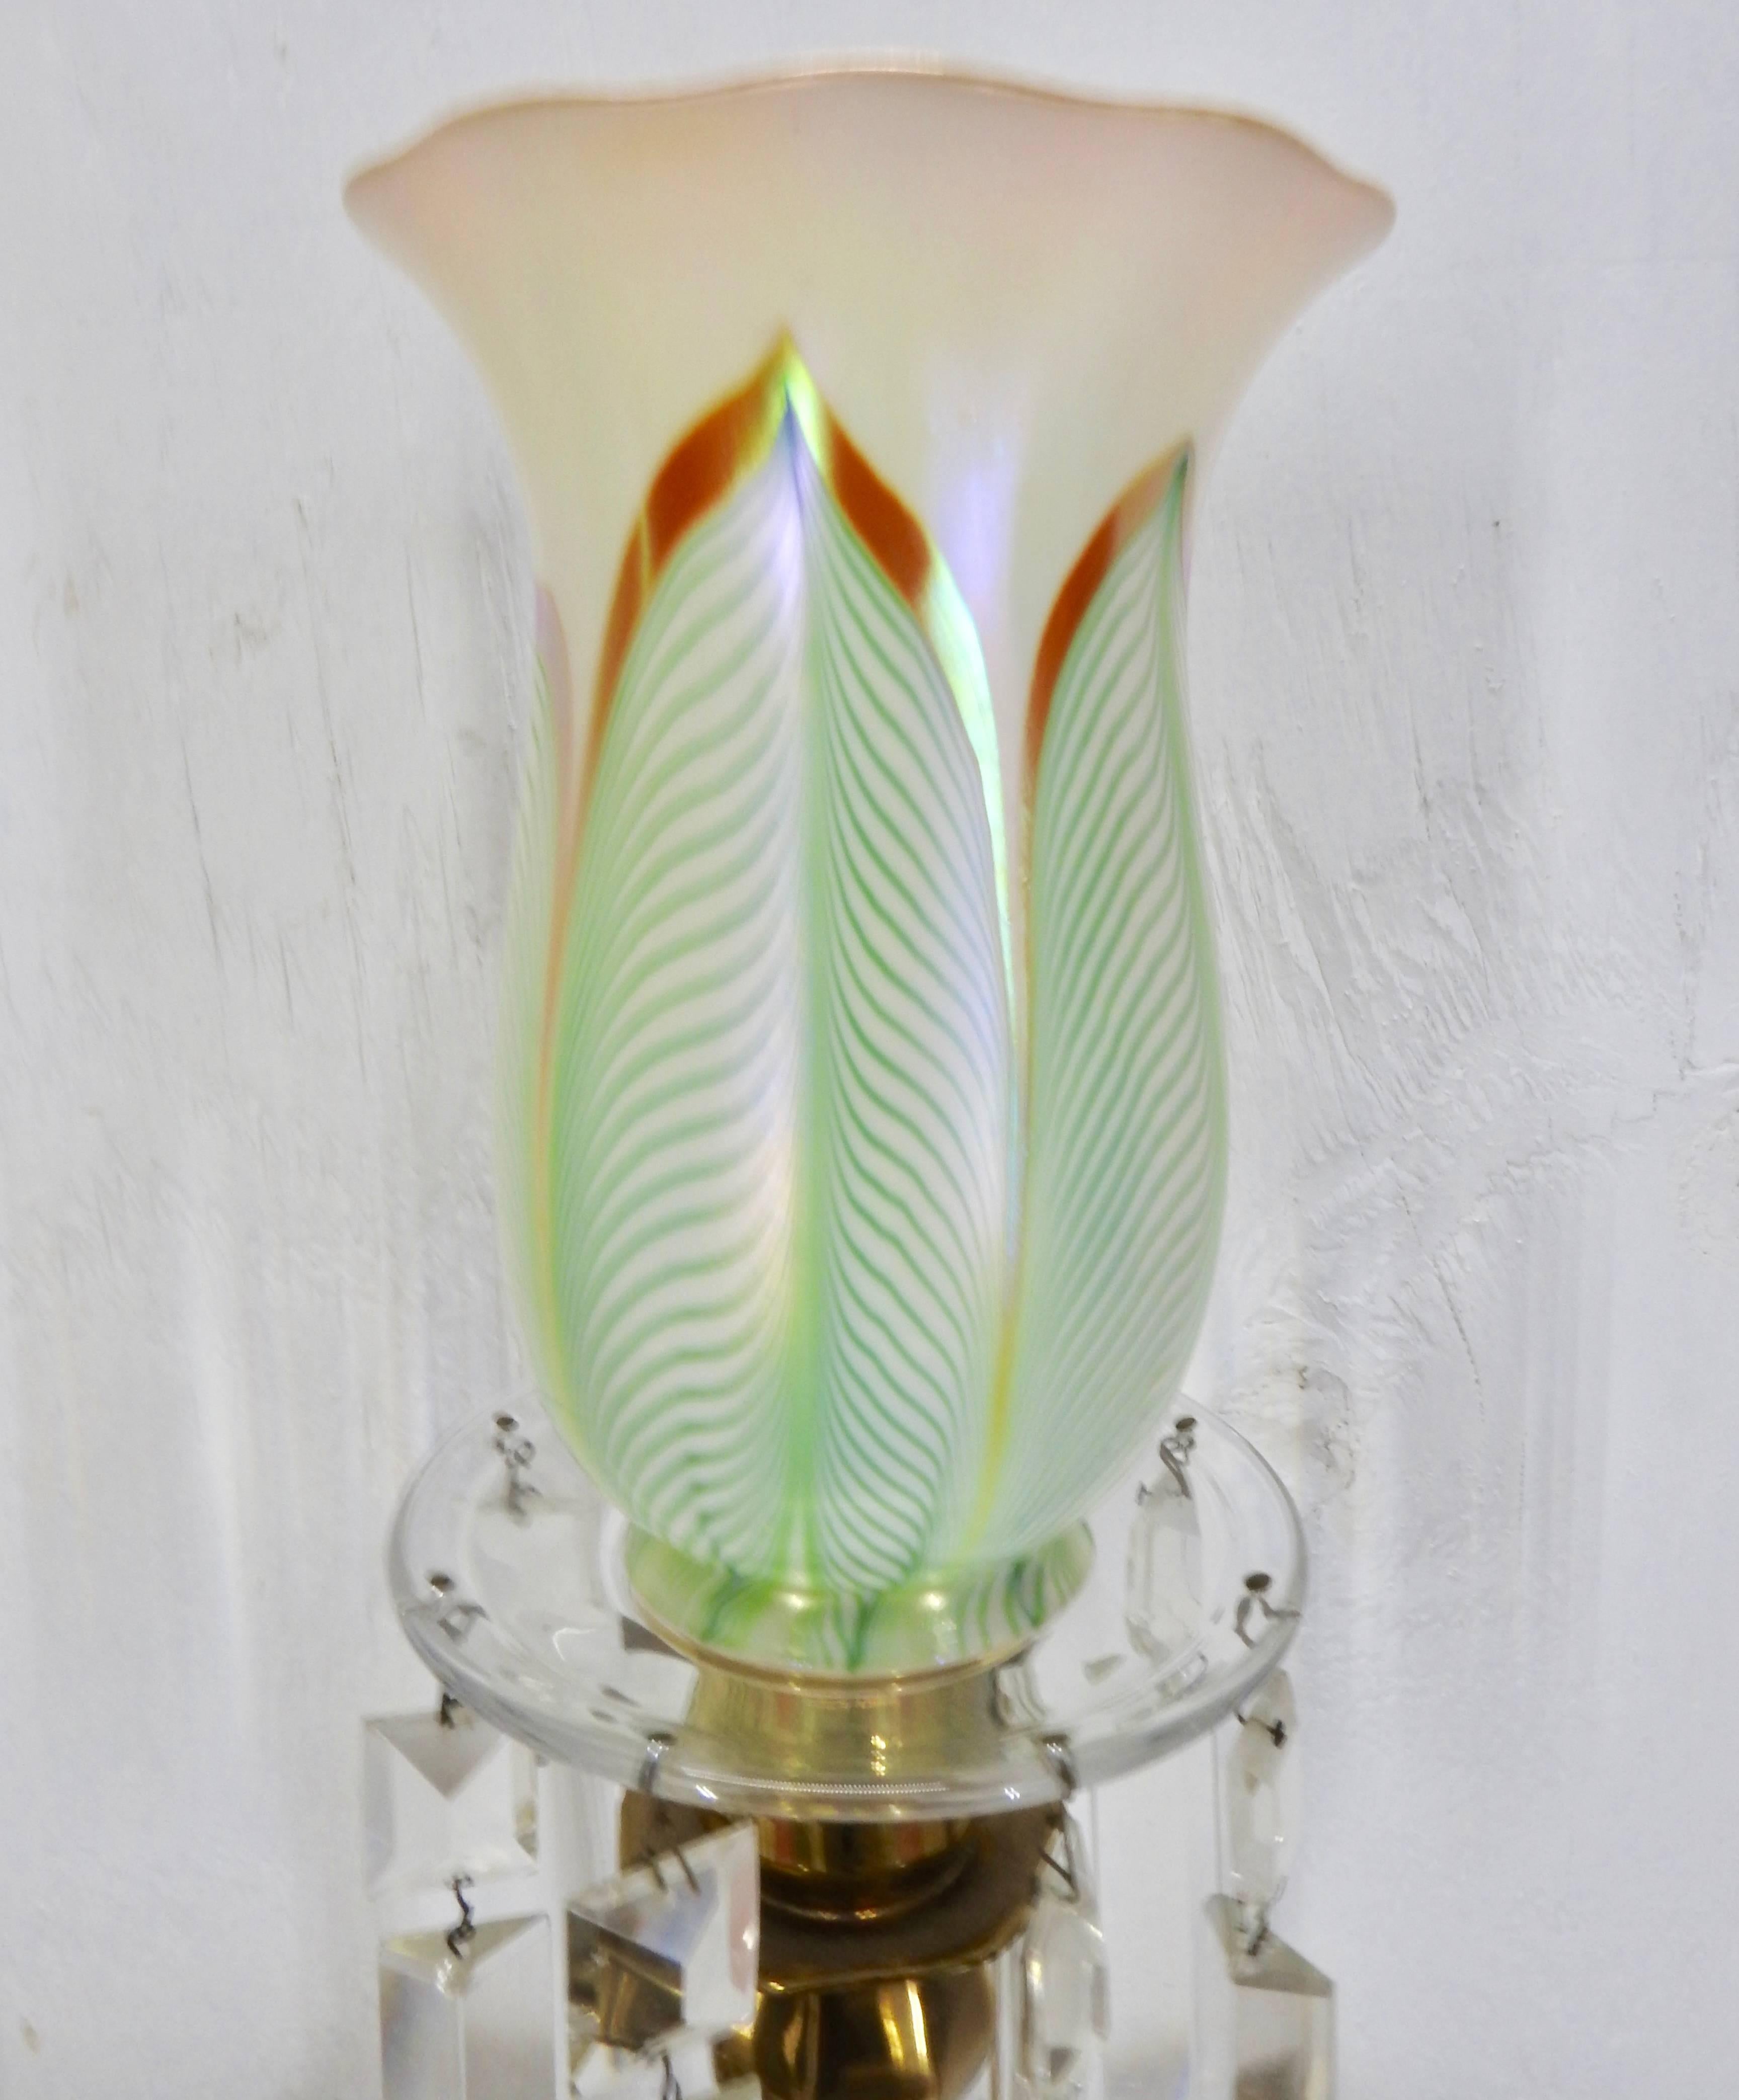 Hand-Crafted Steuben Pulled Feather Shades on Antique Brass Lamp with Prisms For Sale